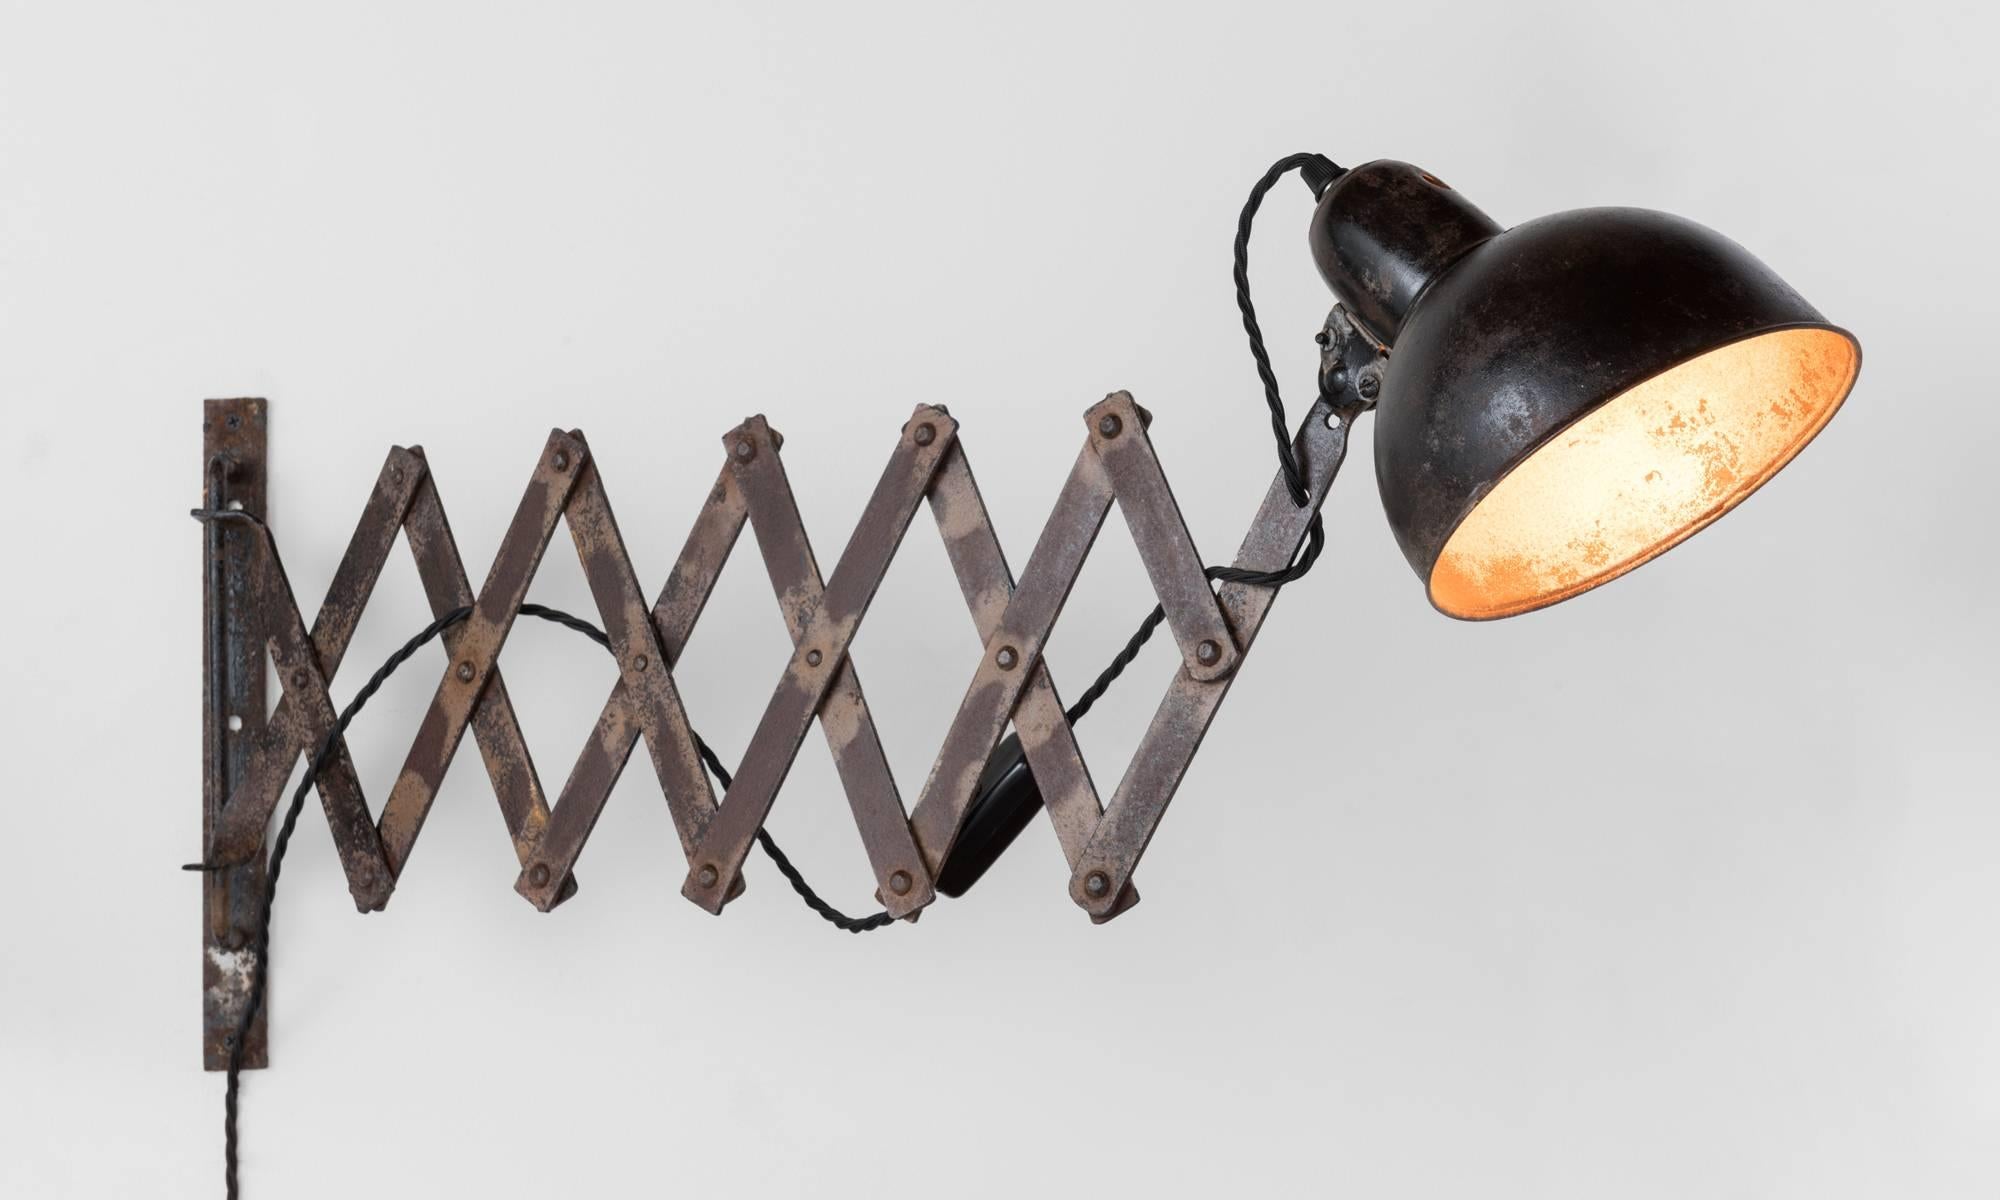 Industrial Scissor lamp by Kaiser Idell, circa 1930.

Early model by Kaiser Idell with wonderful patina.

Lamp extends 16